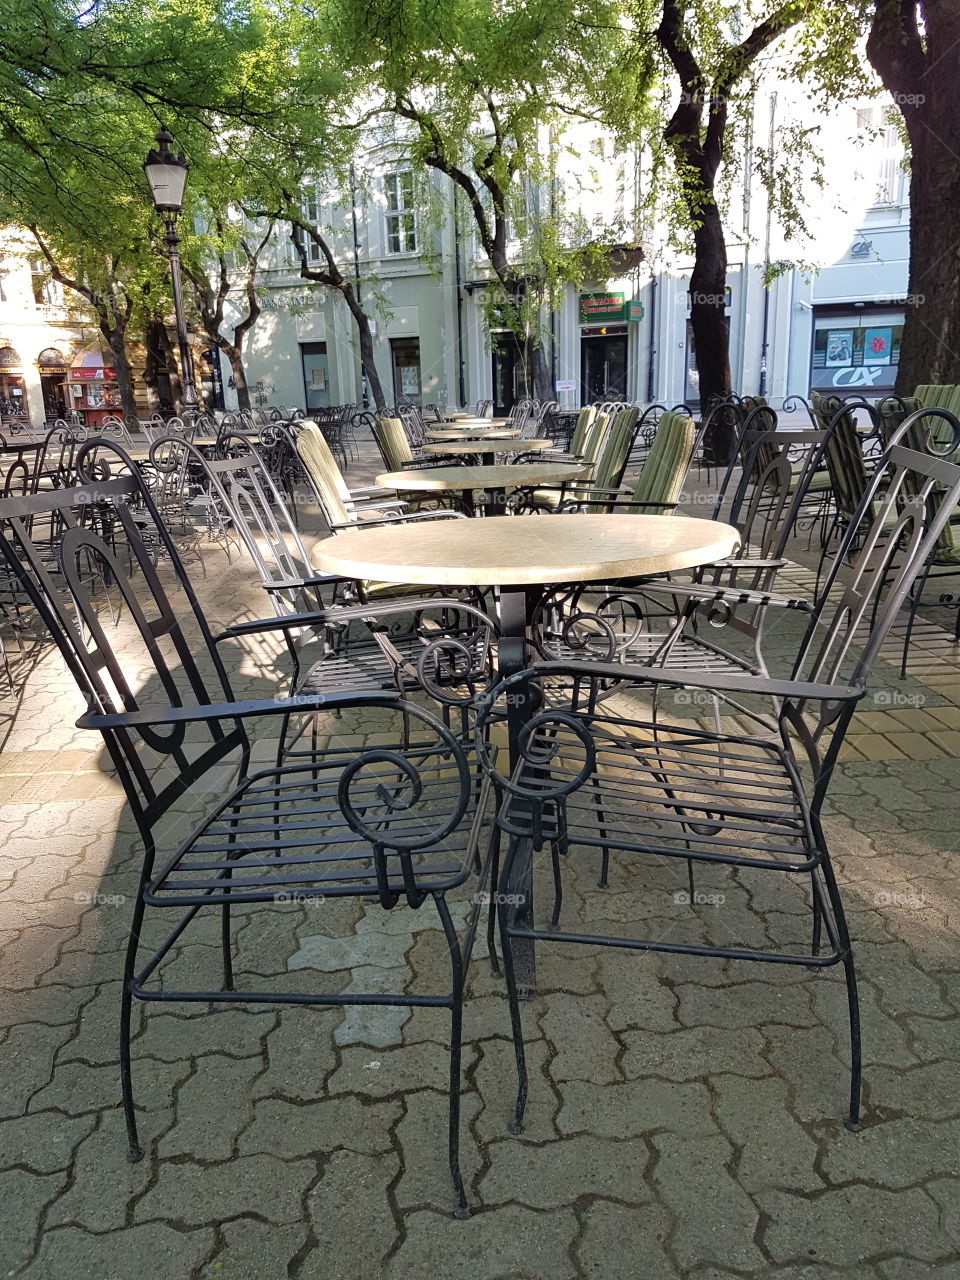 restaurant terrace with empty iron tables and chairs